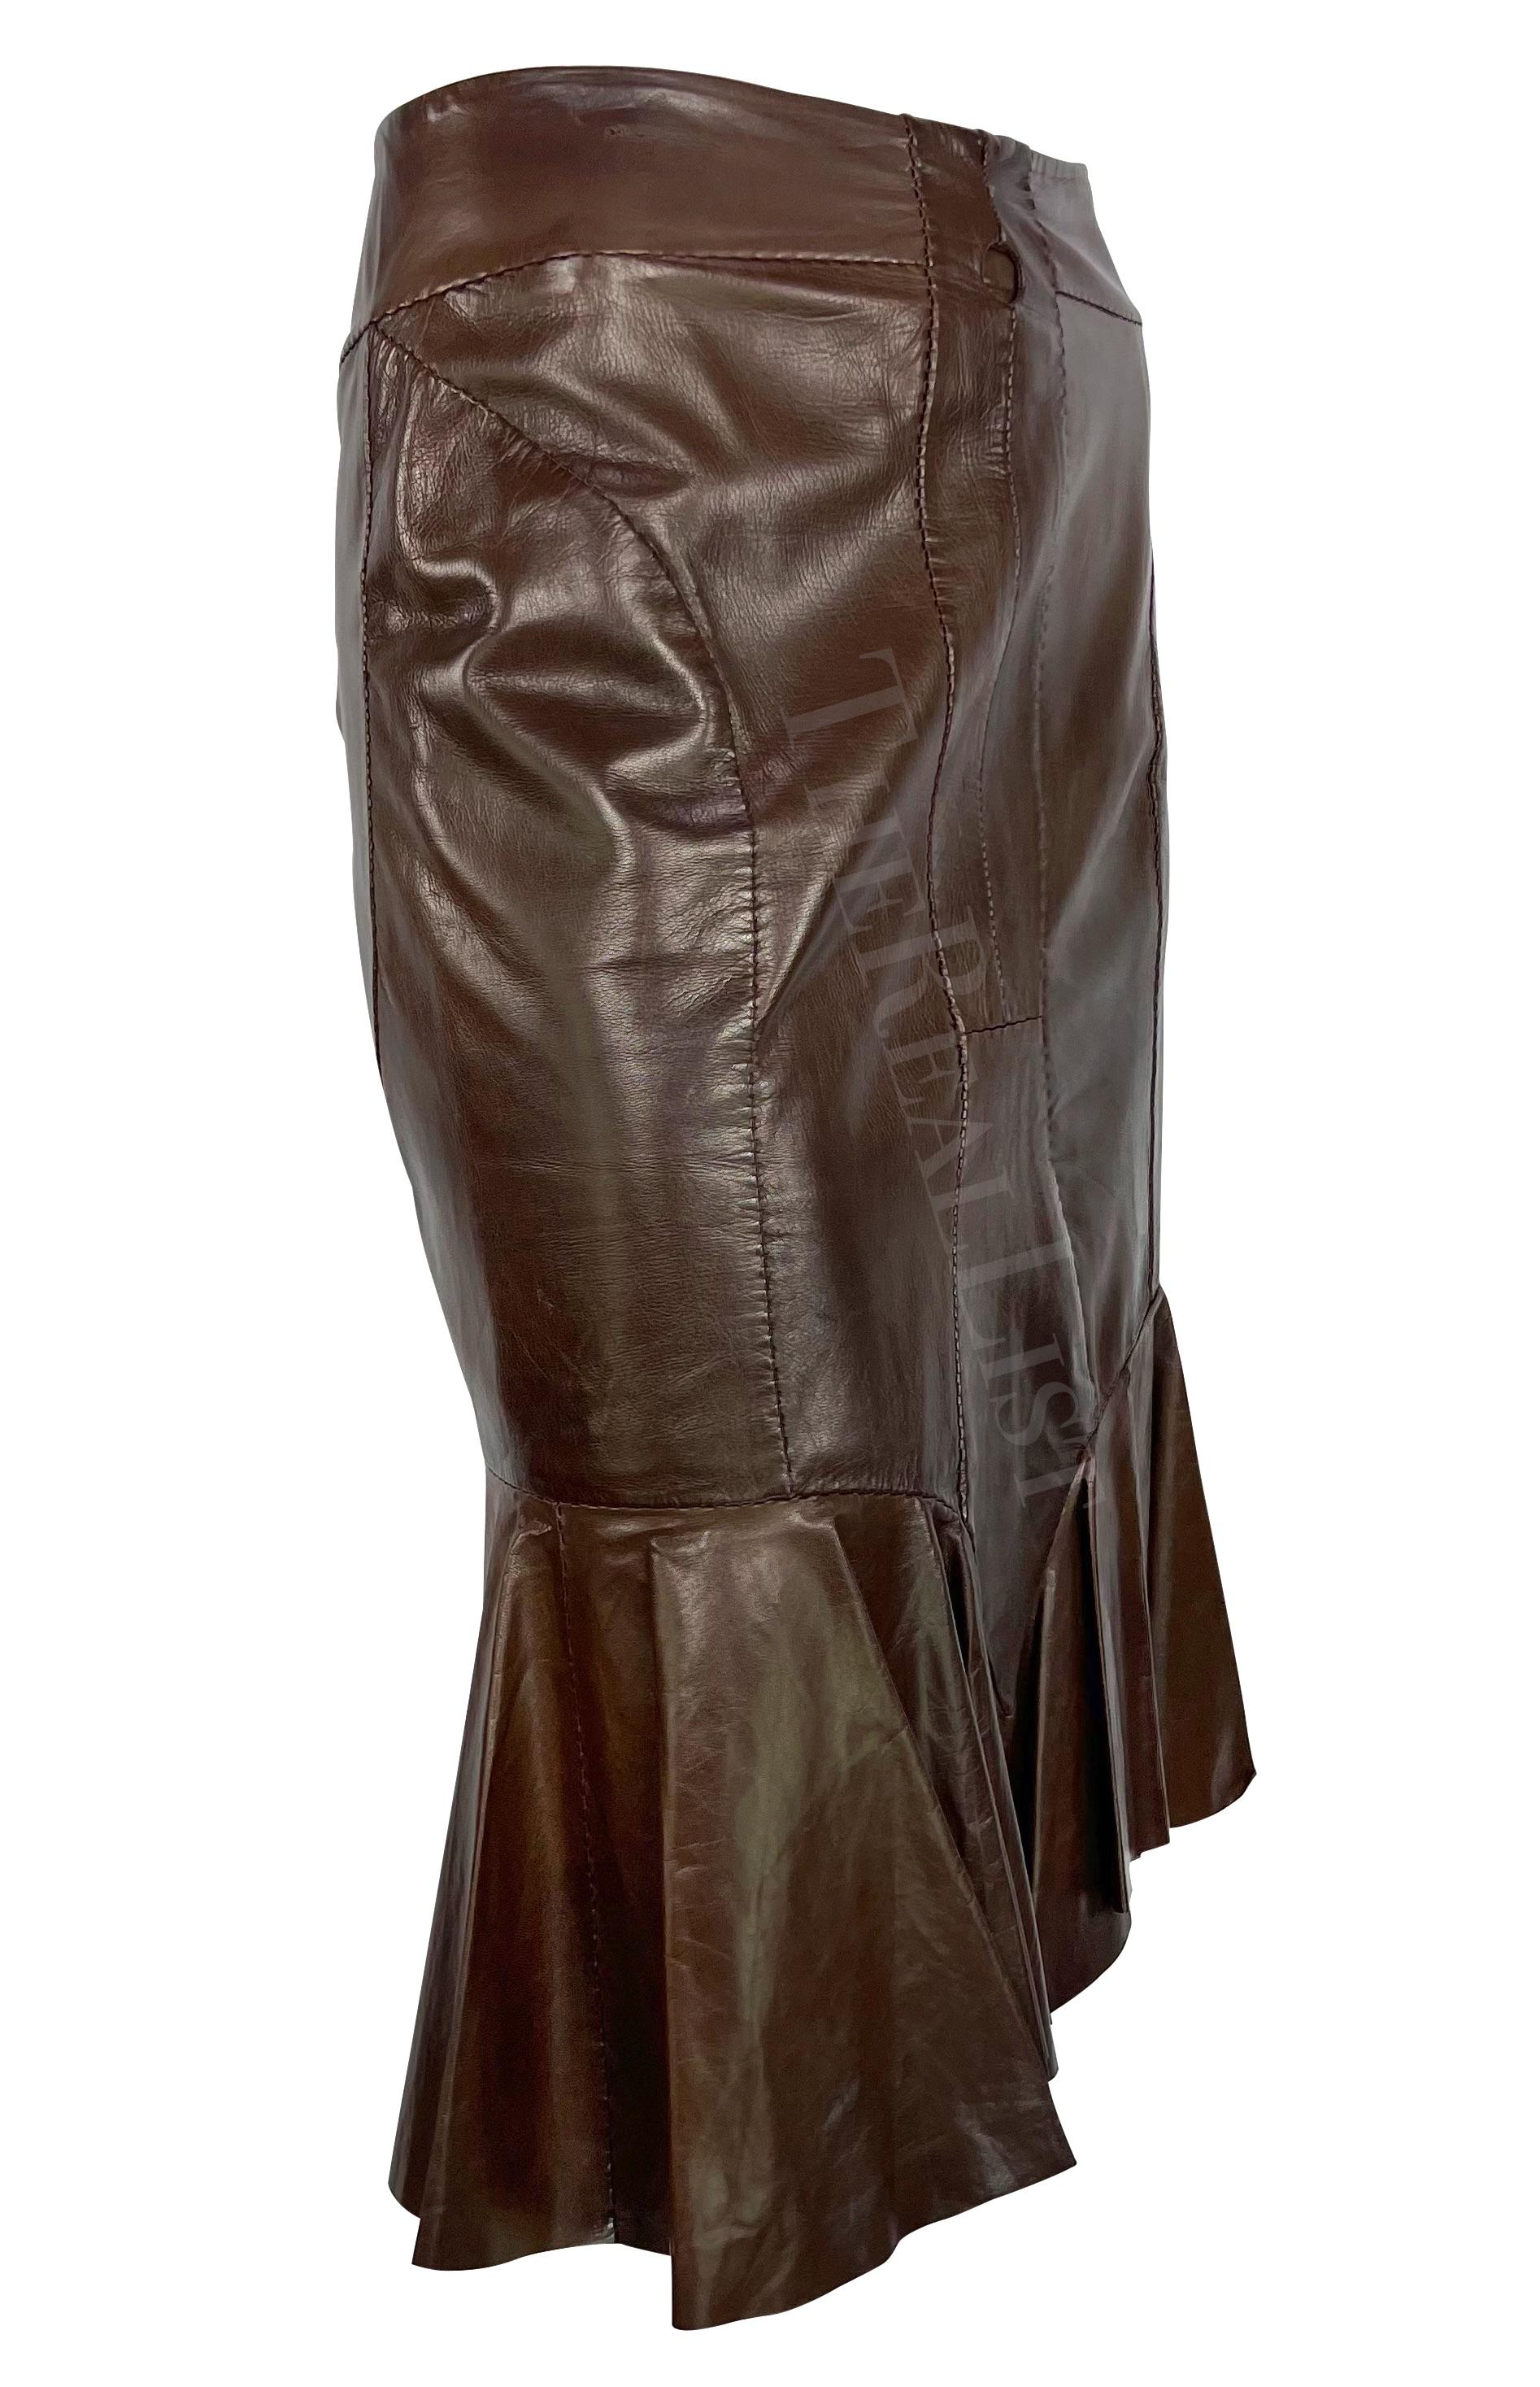 S/S 2003 Yves Saint Laurent by Tom Ford Anatomic Brown Leather Ruffle Skirt For Sale 5